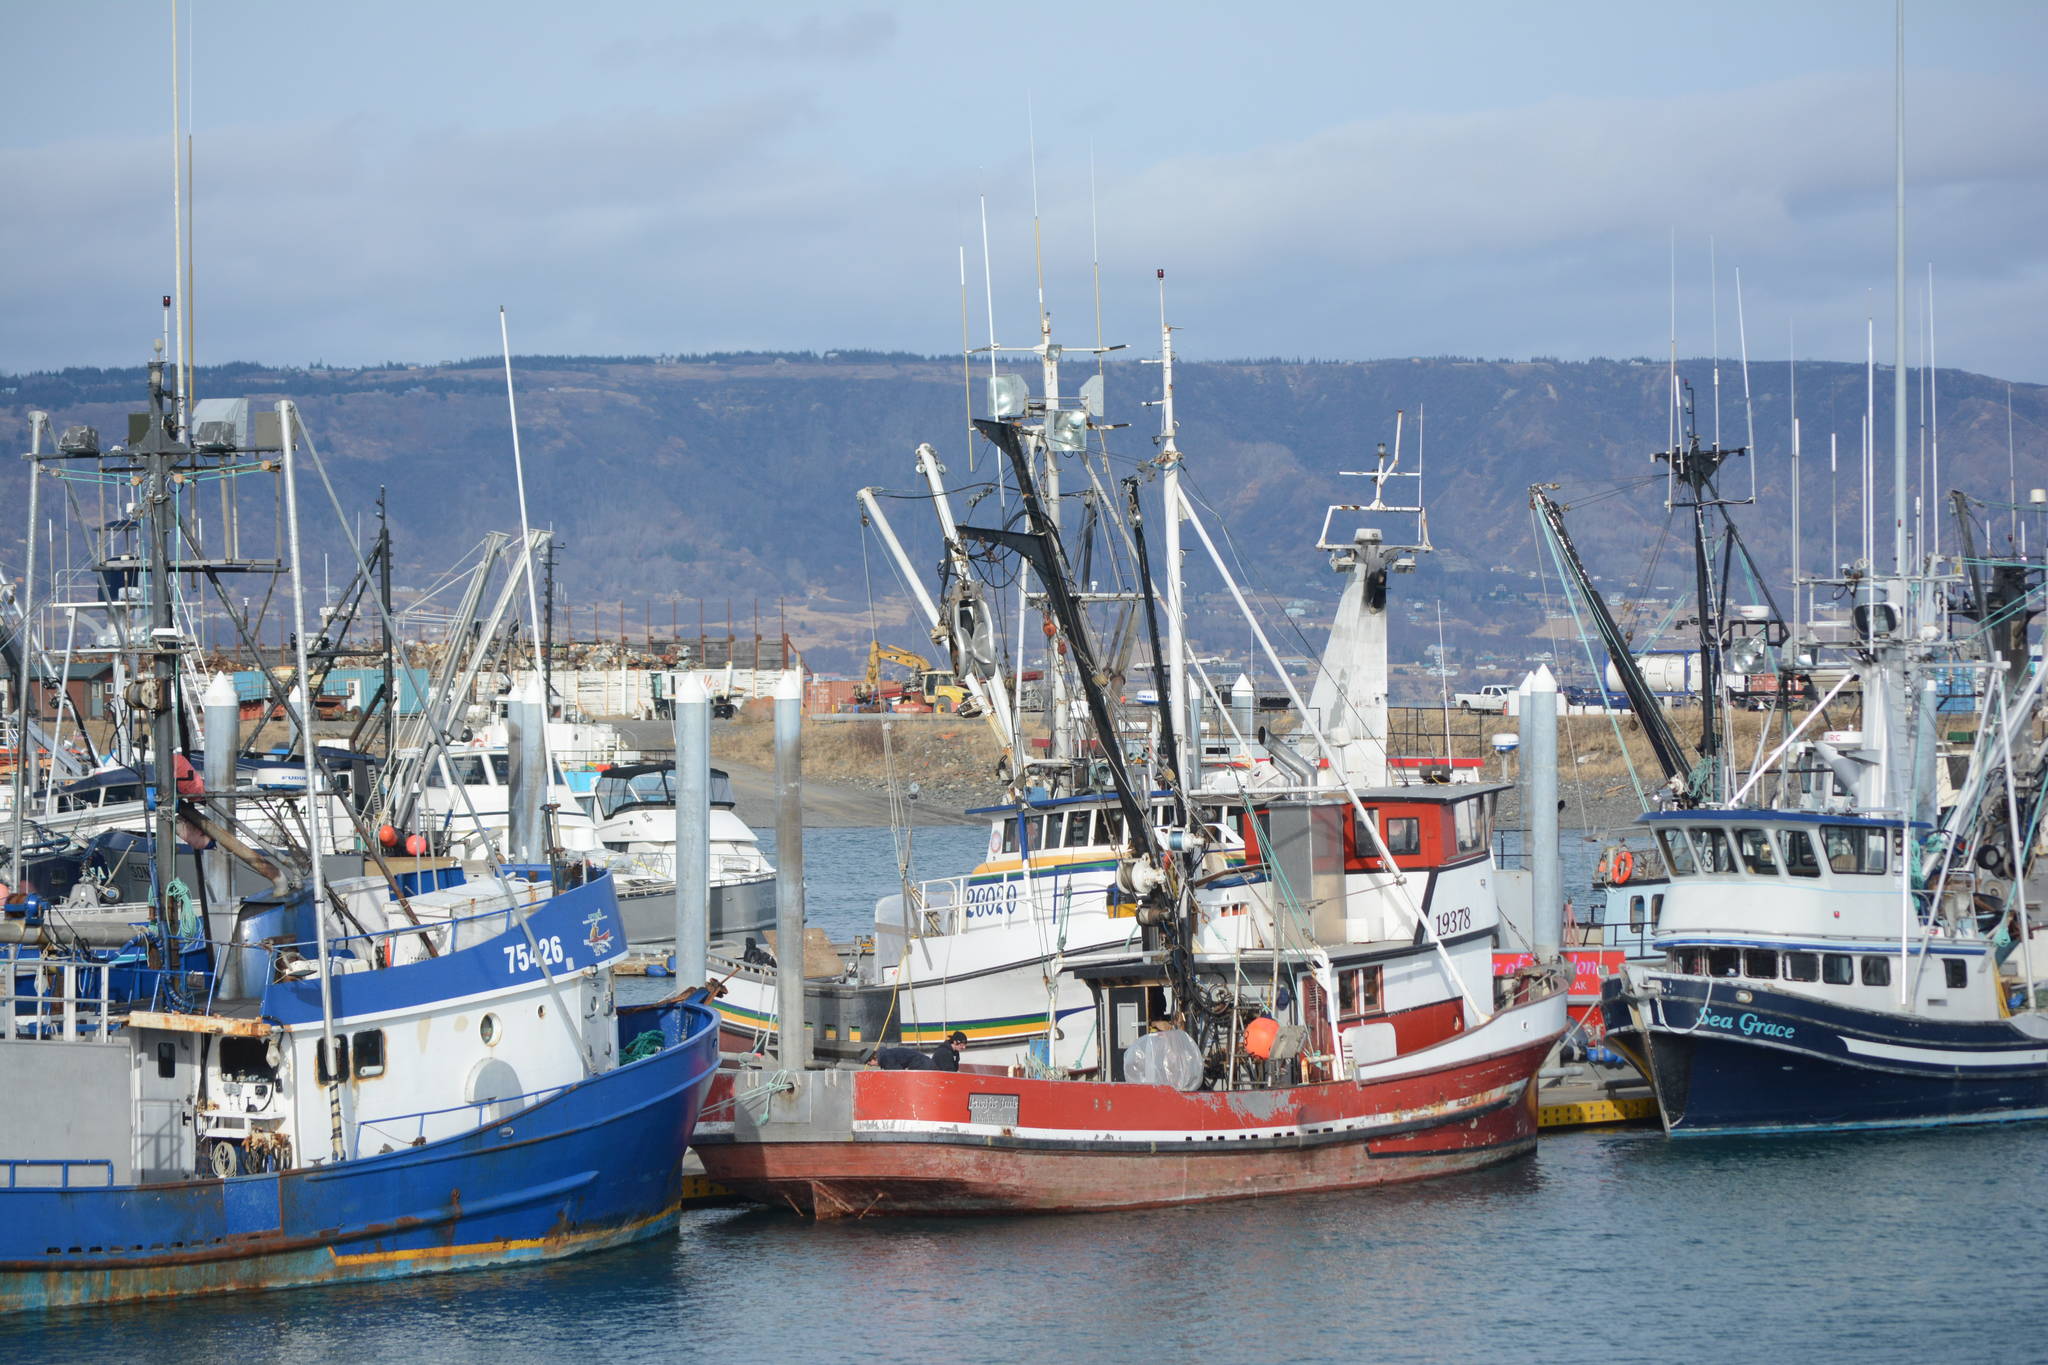 Seawatch: Downward trend predicted for halibut